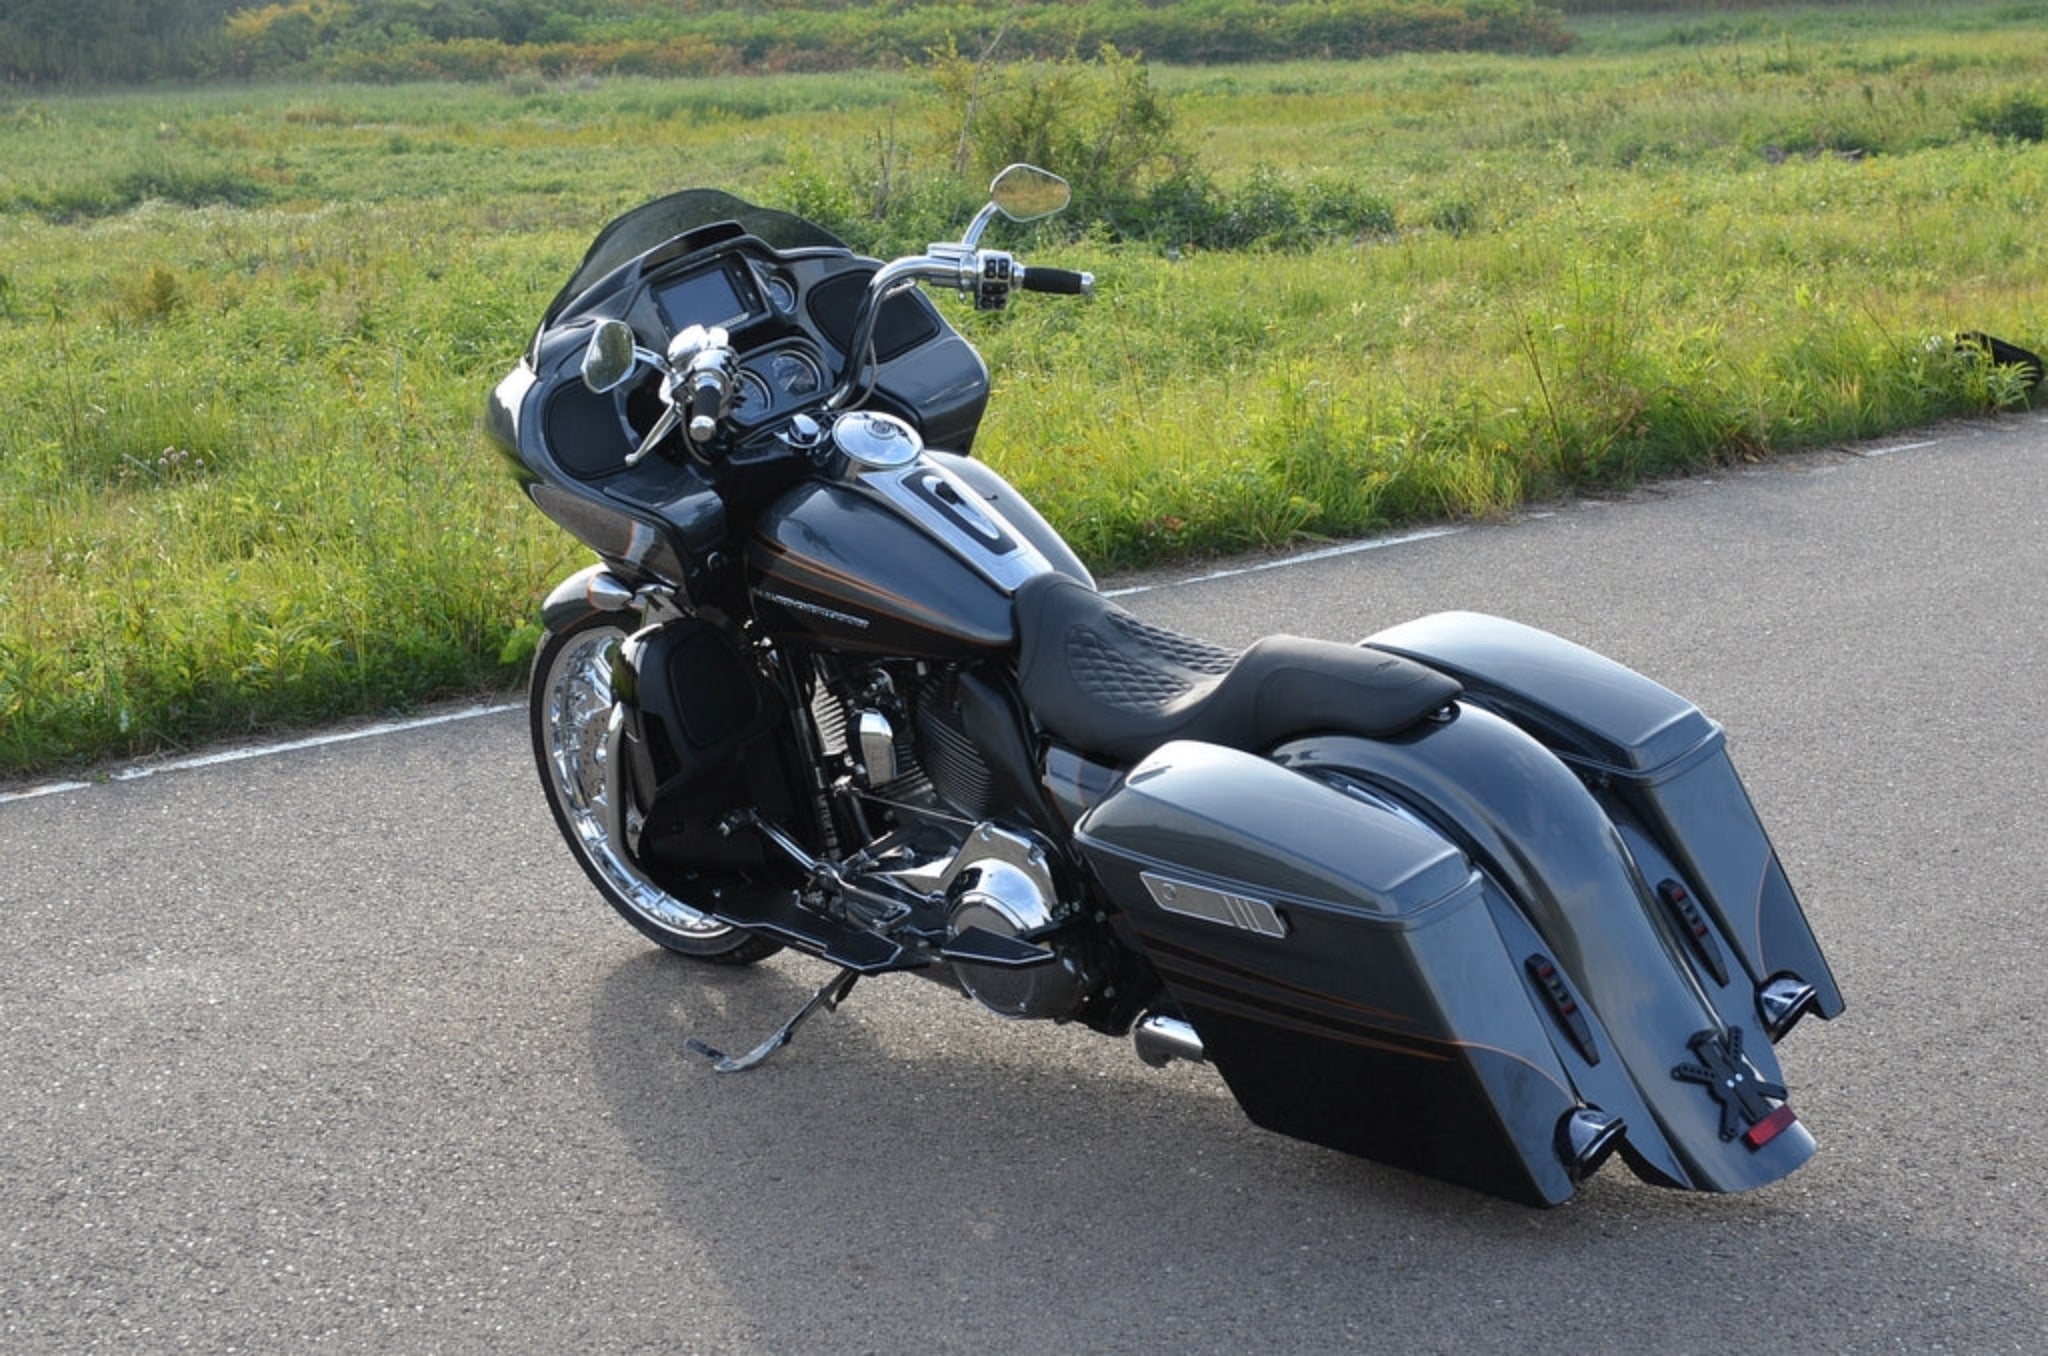 T&S 4" Stretched Saddlebags w/o Lids for Harley Davidson Touring 1993-2013 models - Tommy&Sons